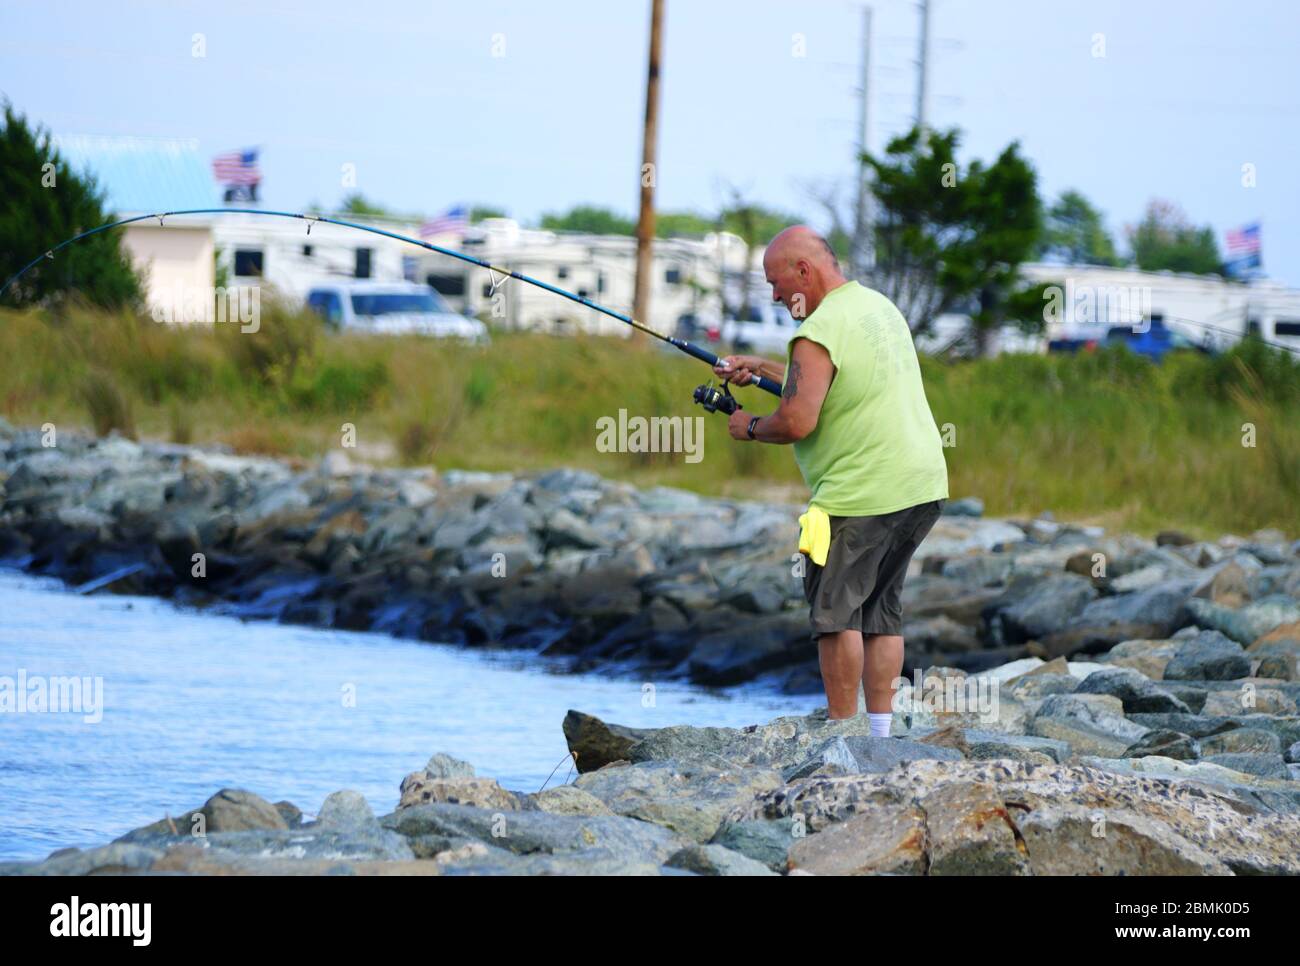 Bethany Beach, Delaware, U.S.A - September 2, 2019 - A man fishing by the rocks by Indian River Inlet Stock Photo